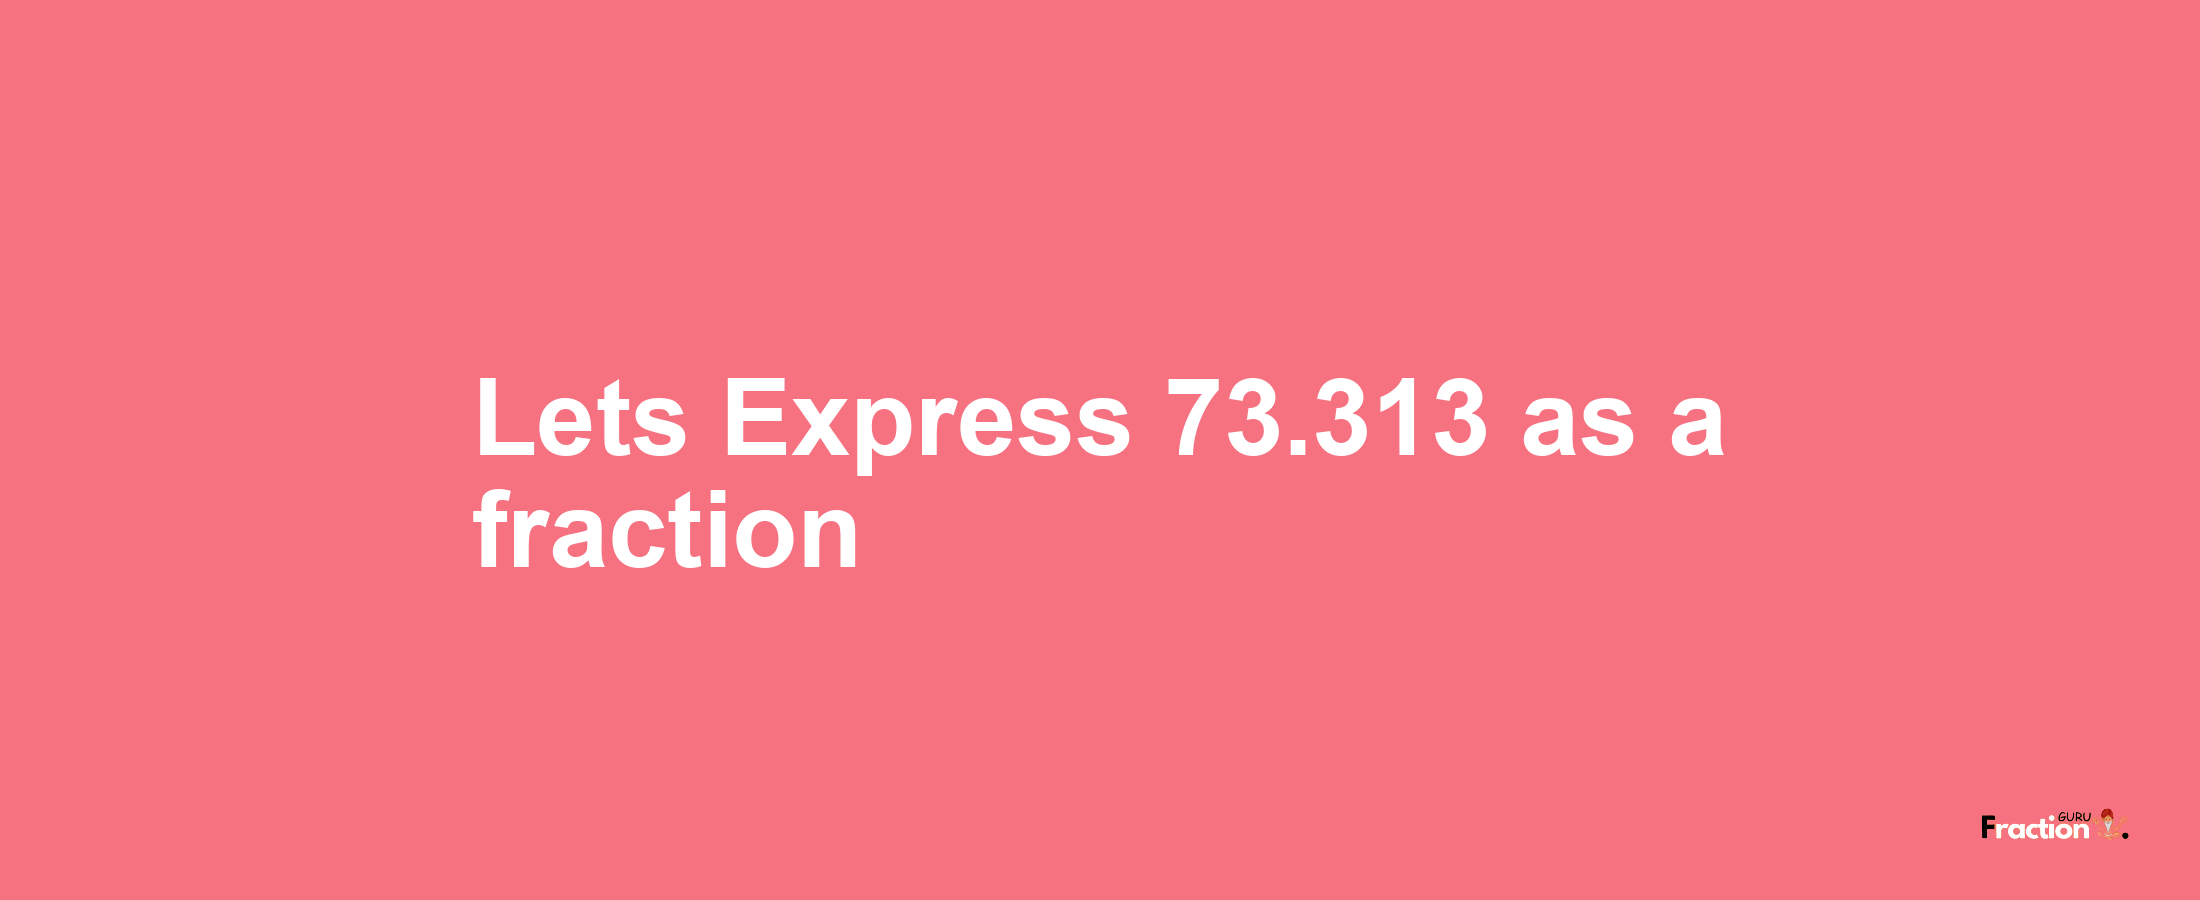 Lets Express 73.313 as afraction